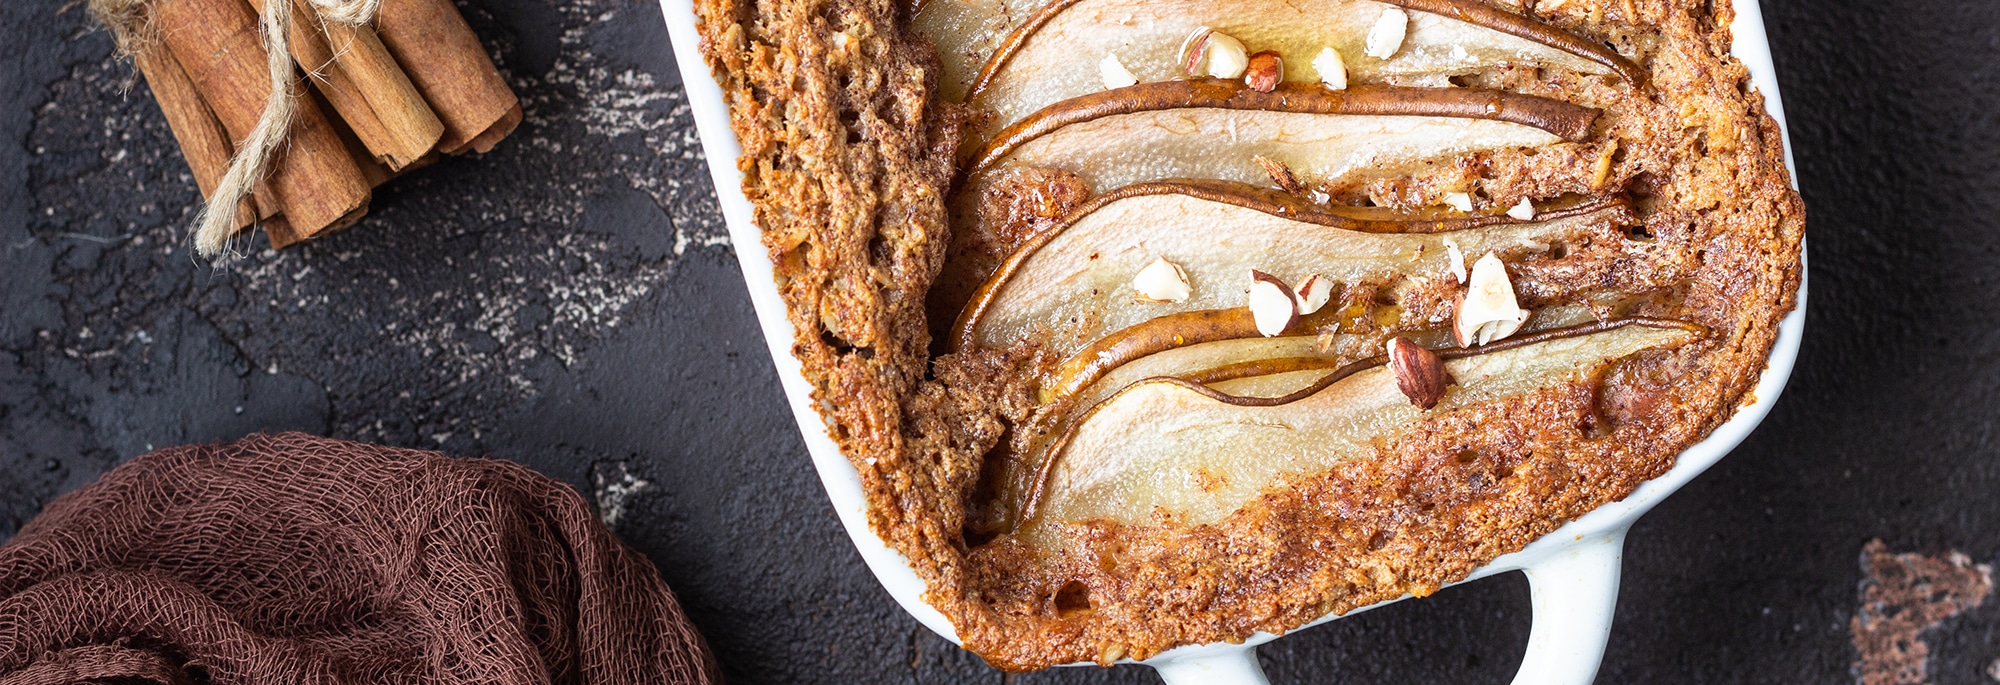 Pear and gingerbread crumble